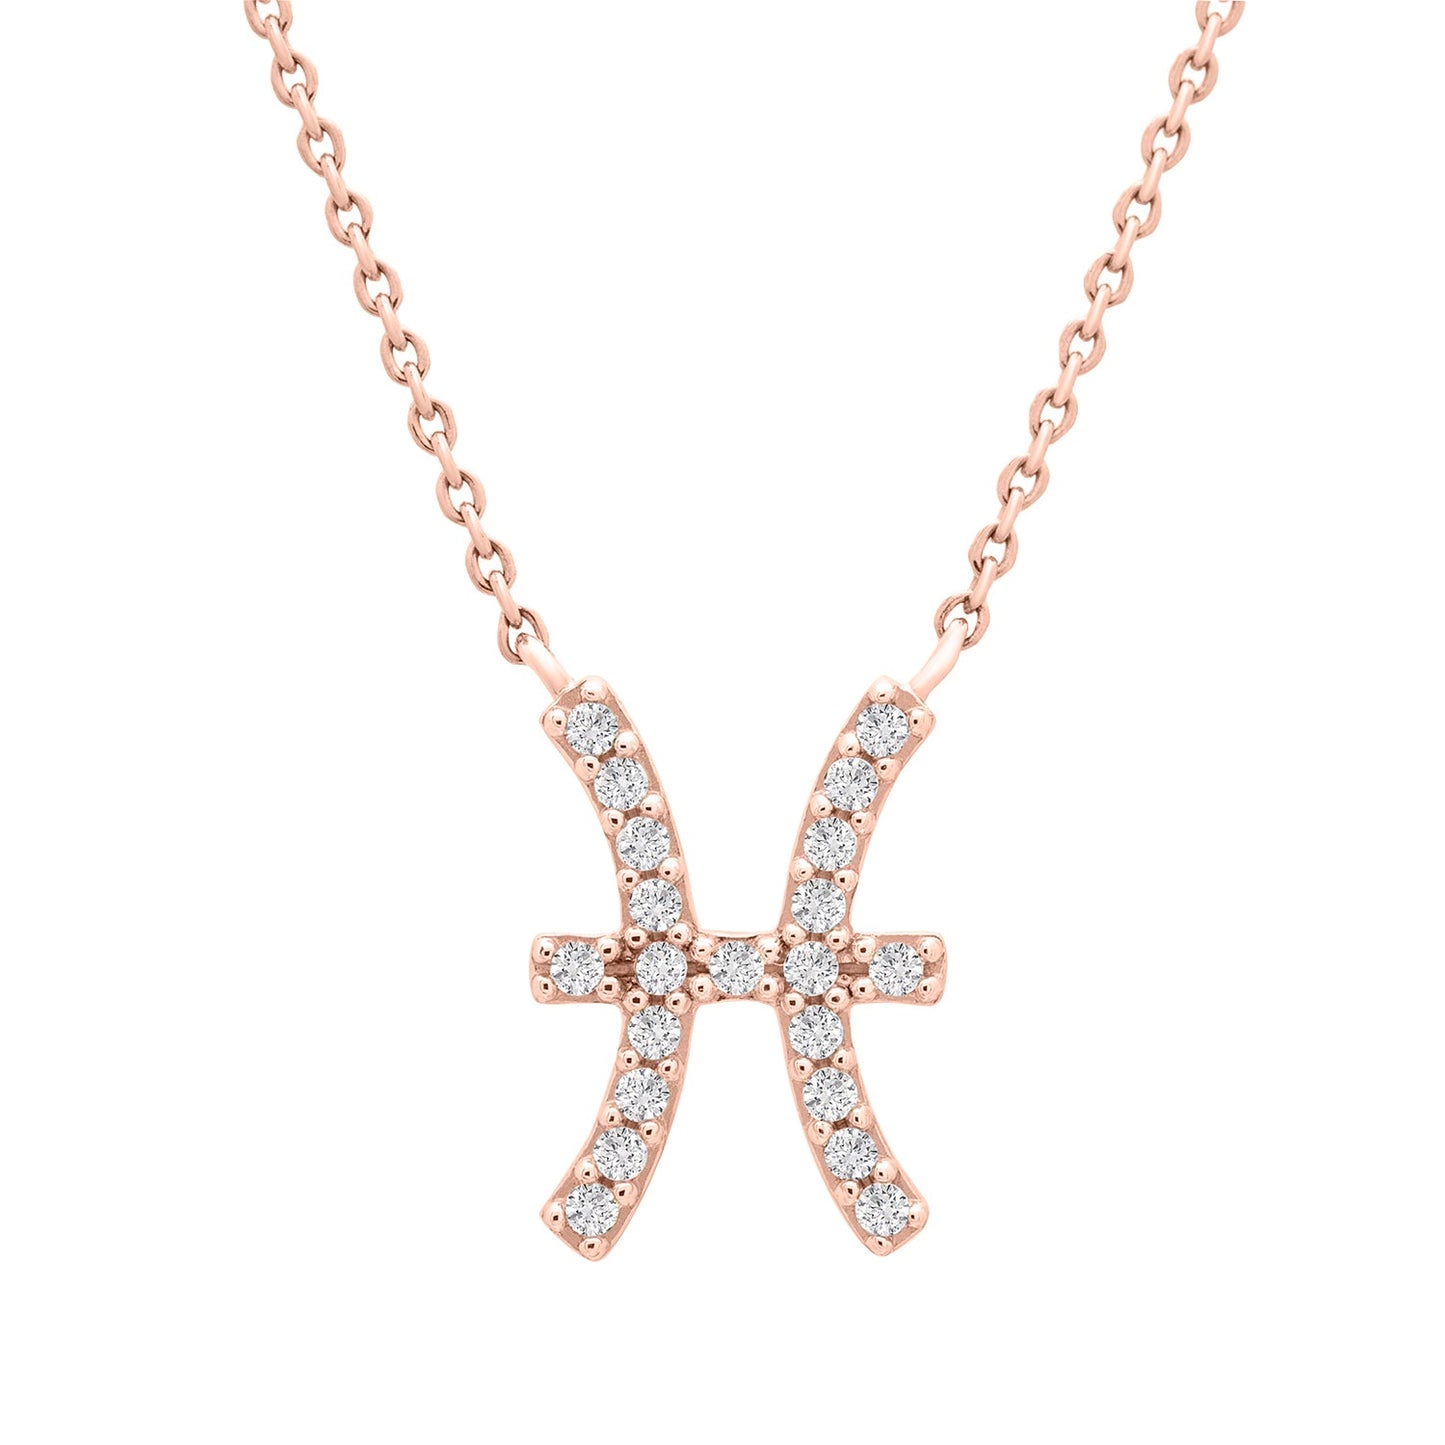 Pisces Zodiac Necklace in Rose Gold with Diamonds